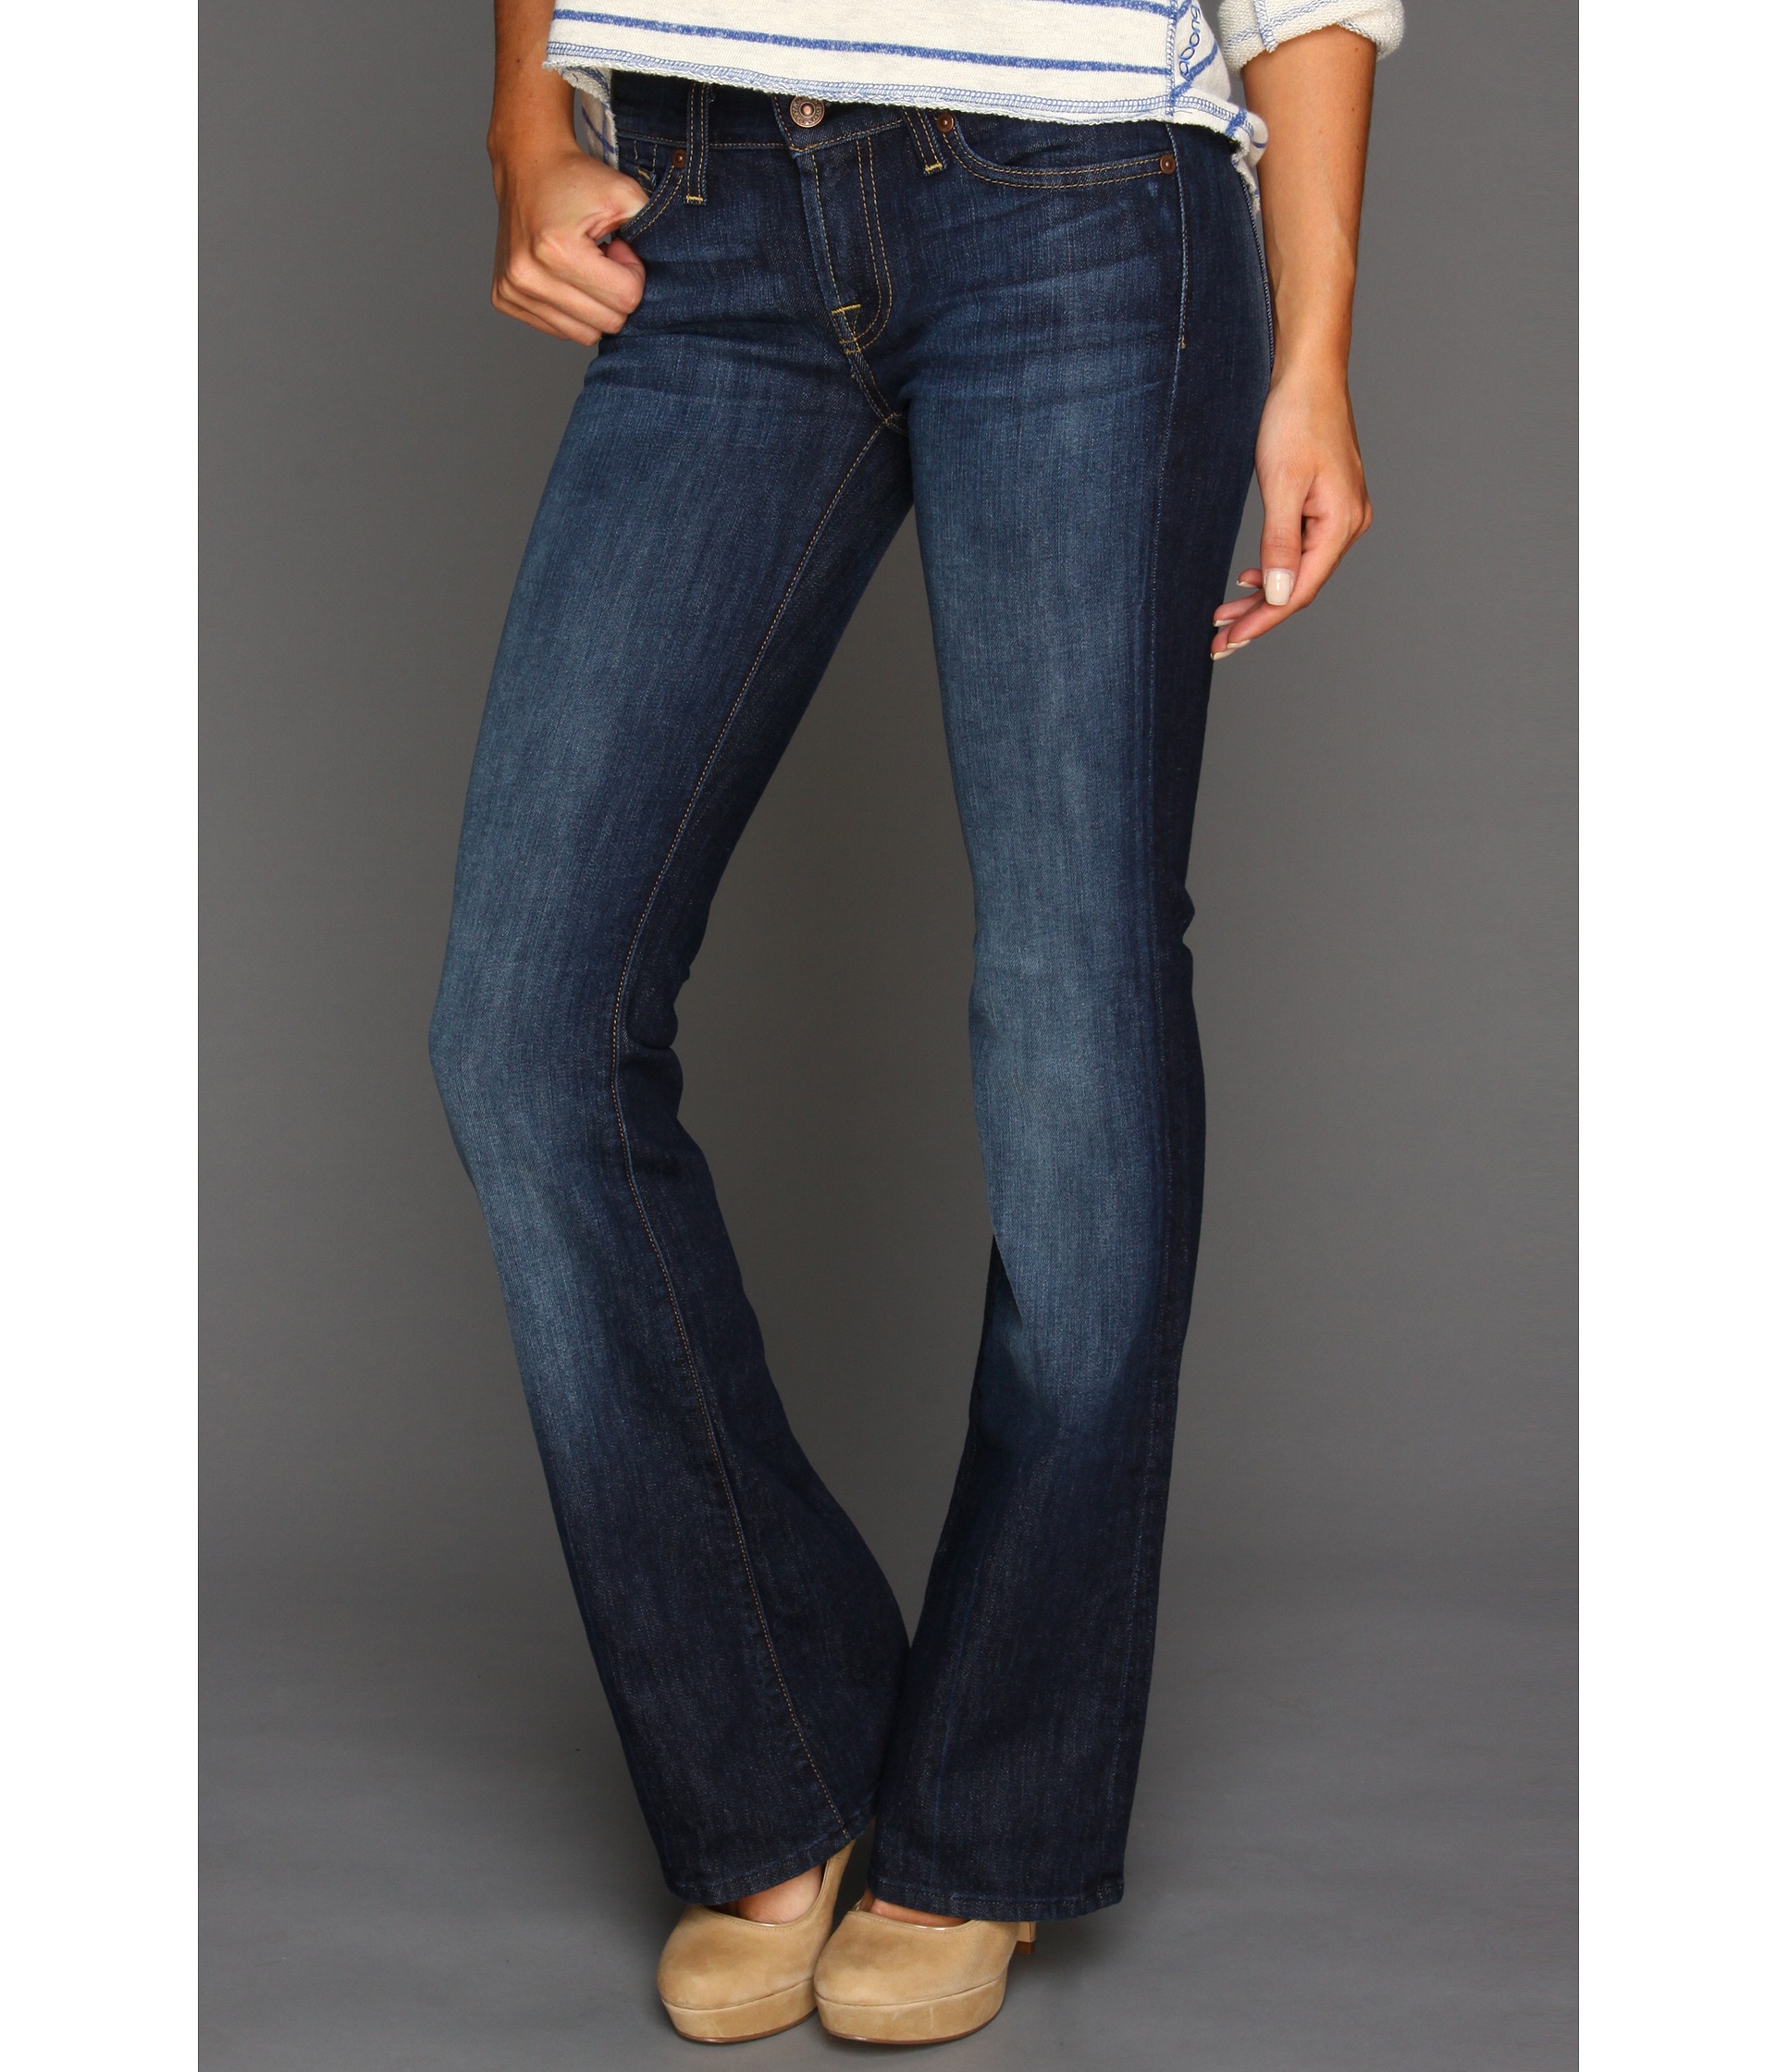 7 For All Mankind Bootcut in Nouveau New York Dark - Zappos.com Free ...